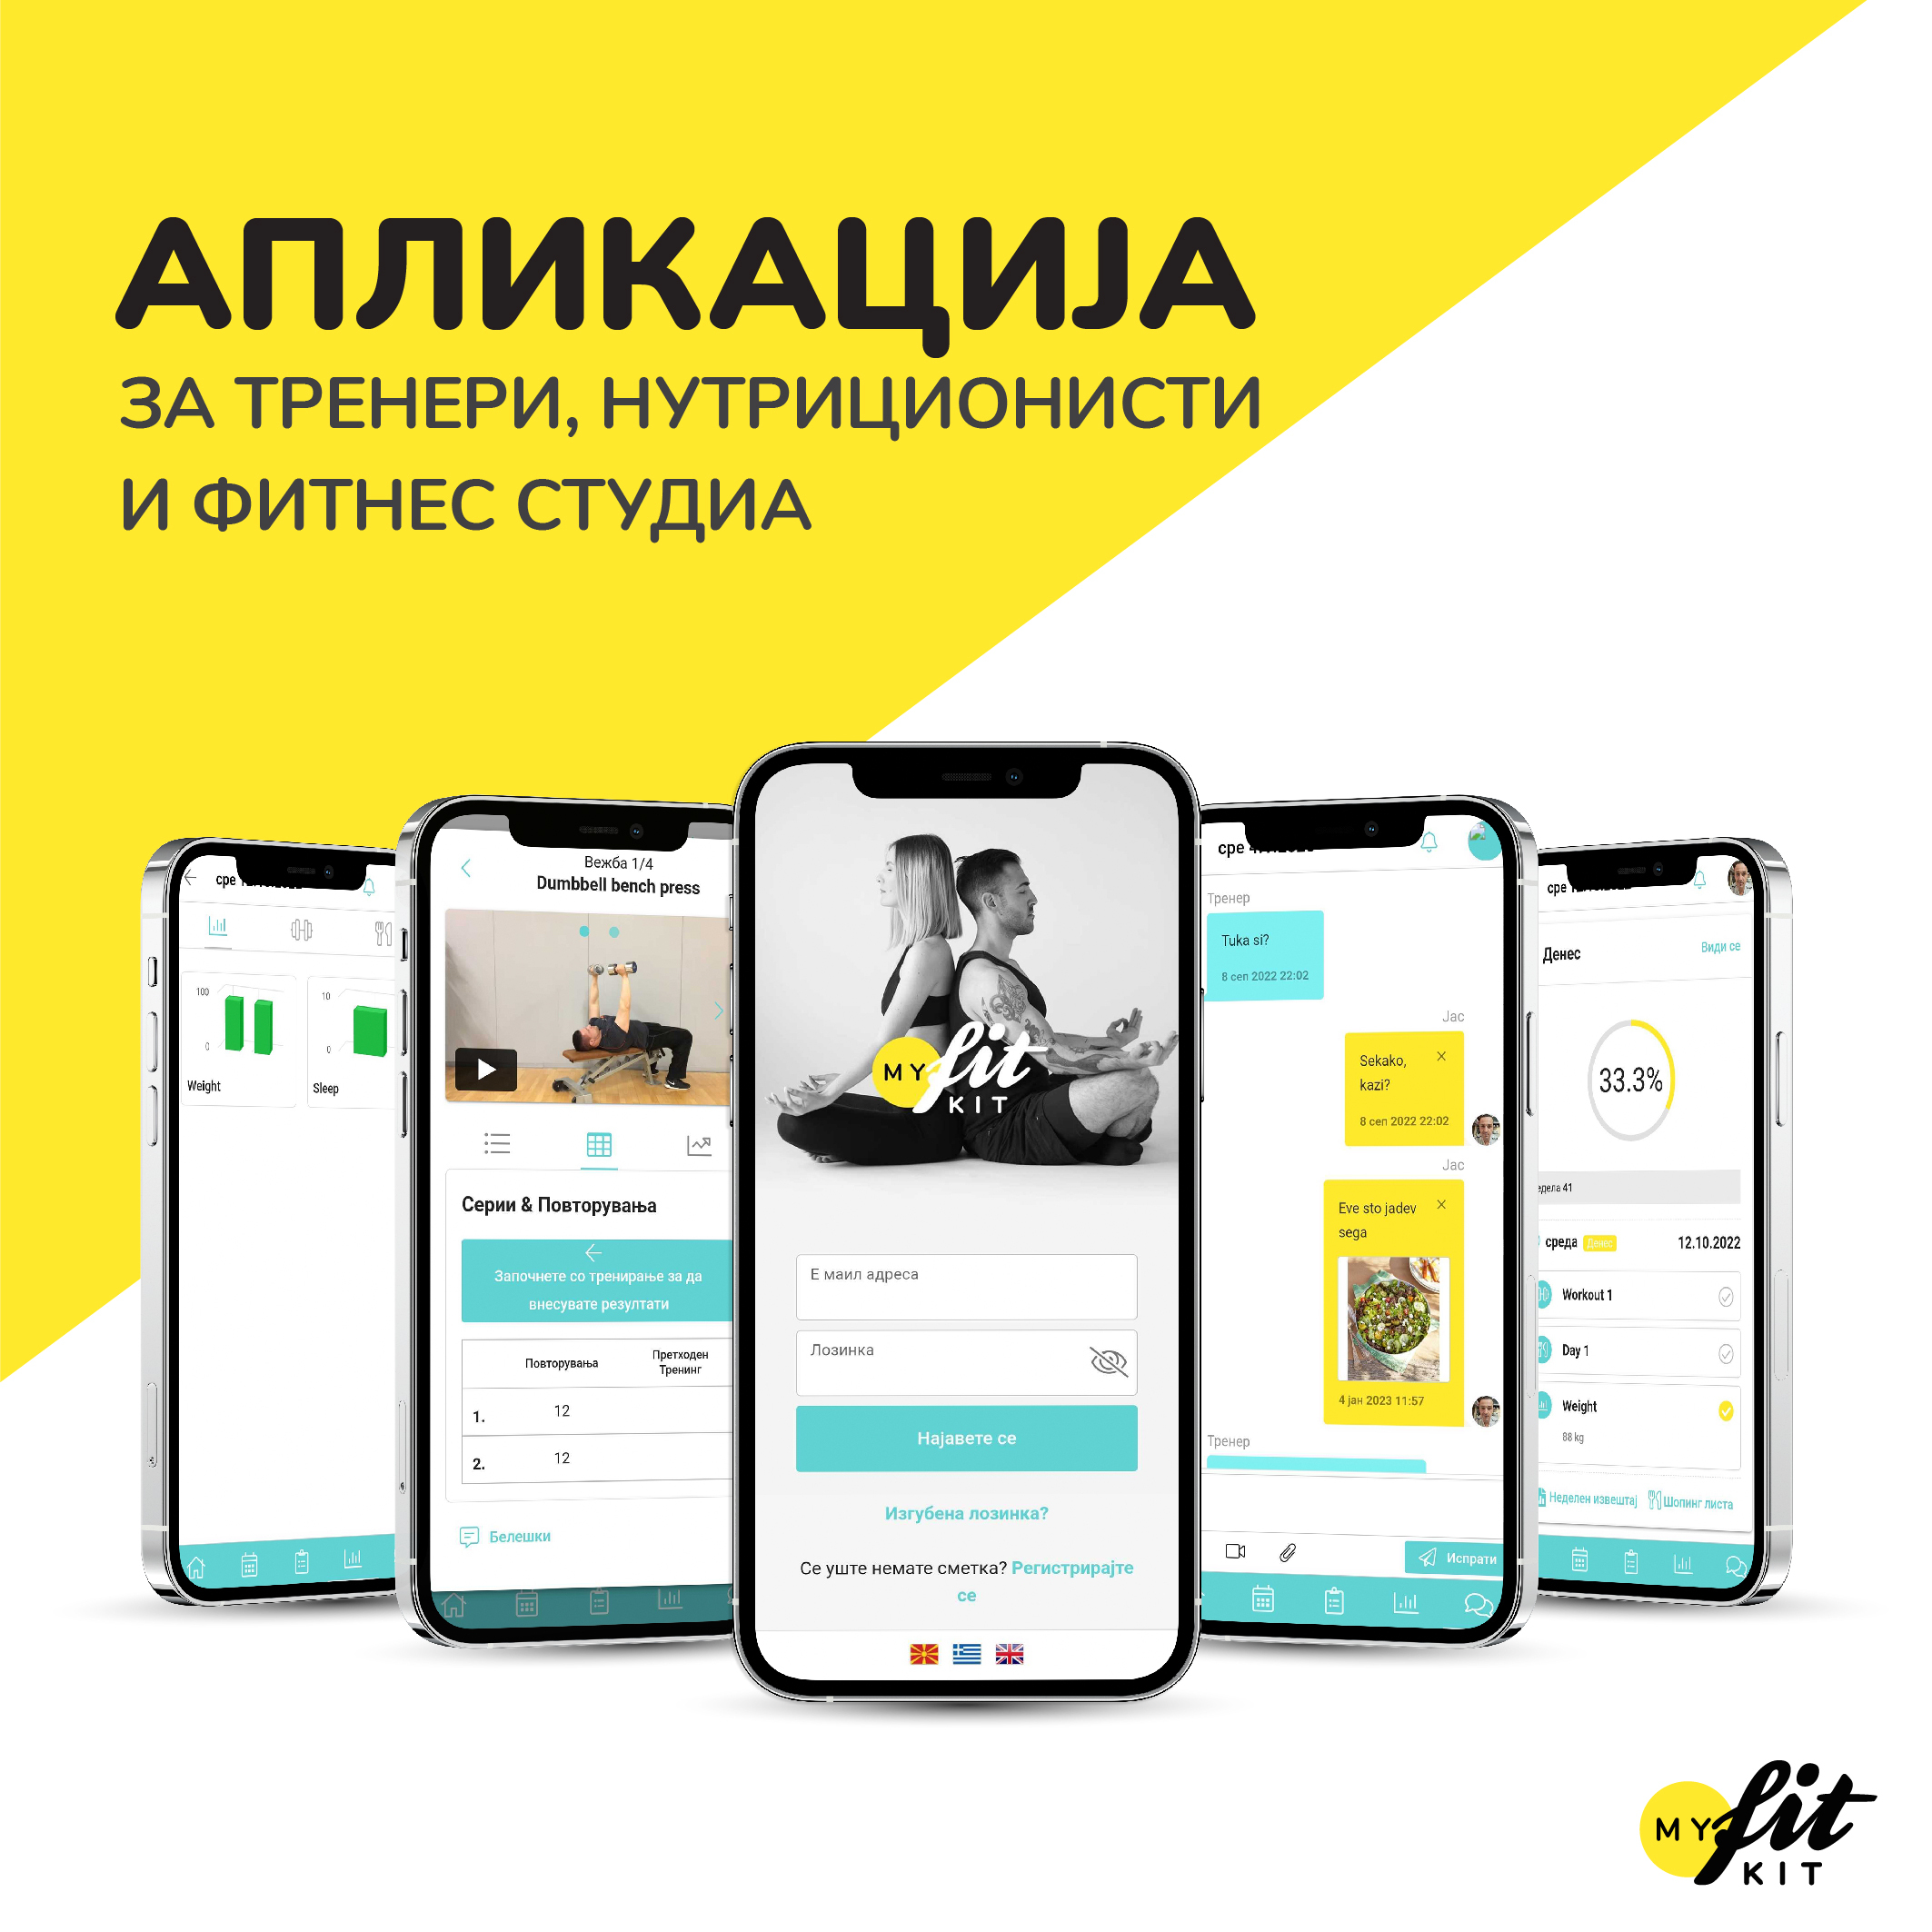 fitkit